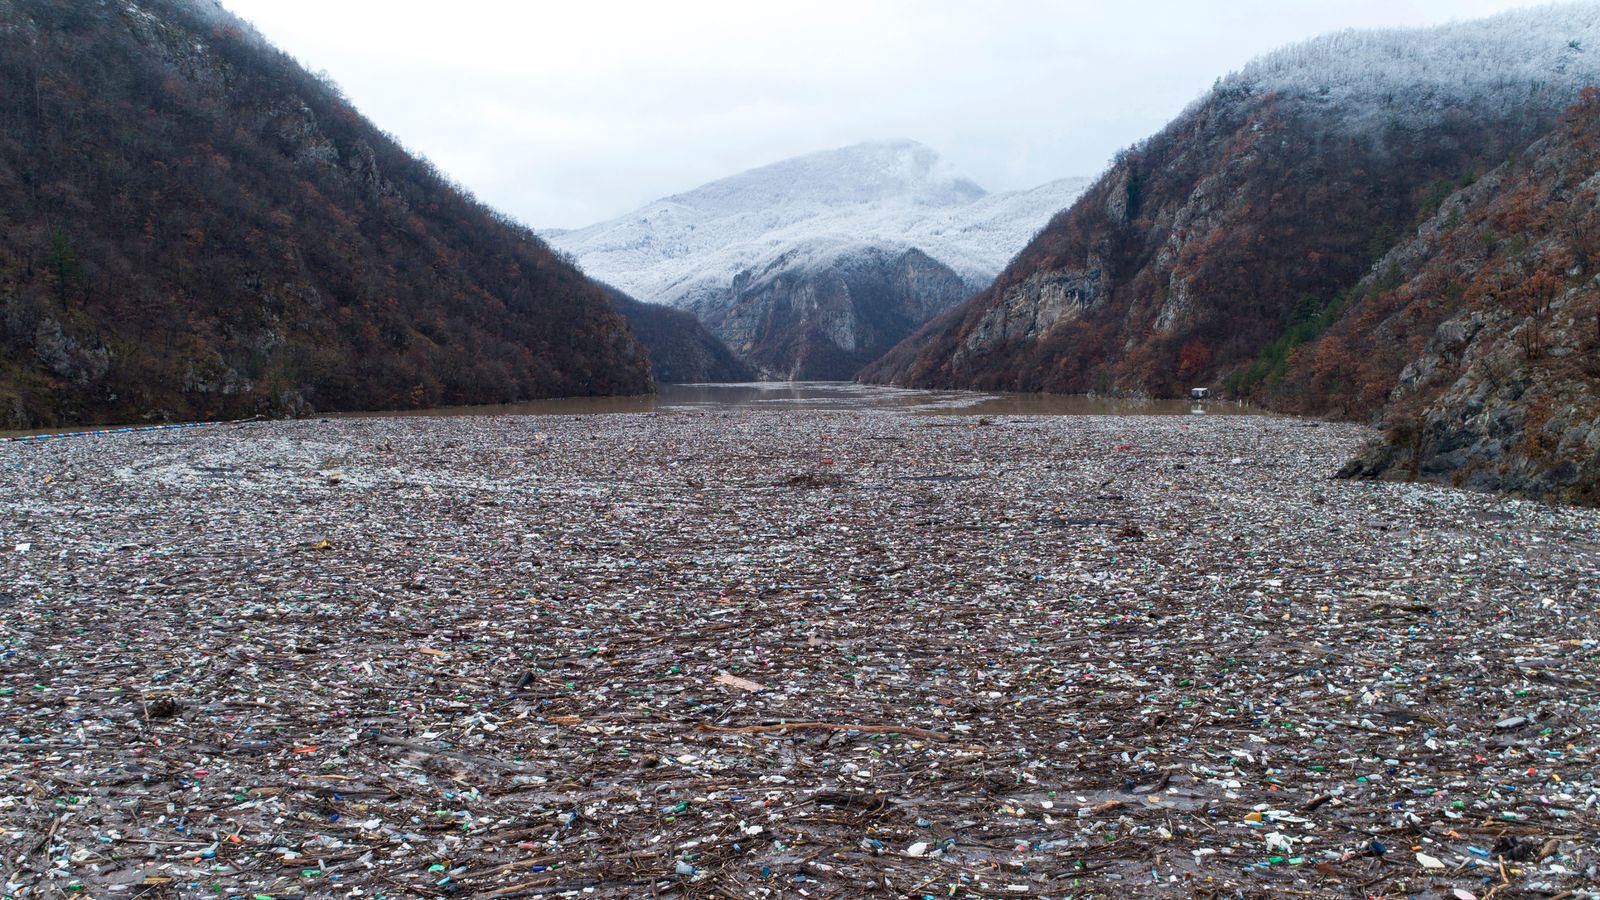 Balkan river known for its breathtaking scenery becomes floating rubbish dump